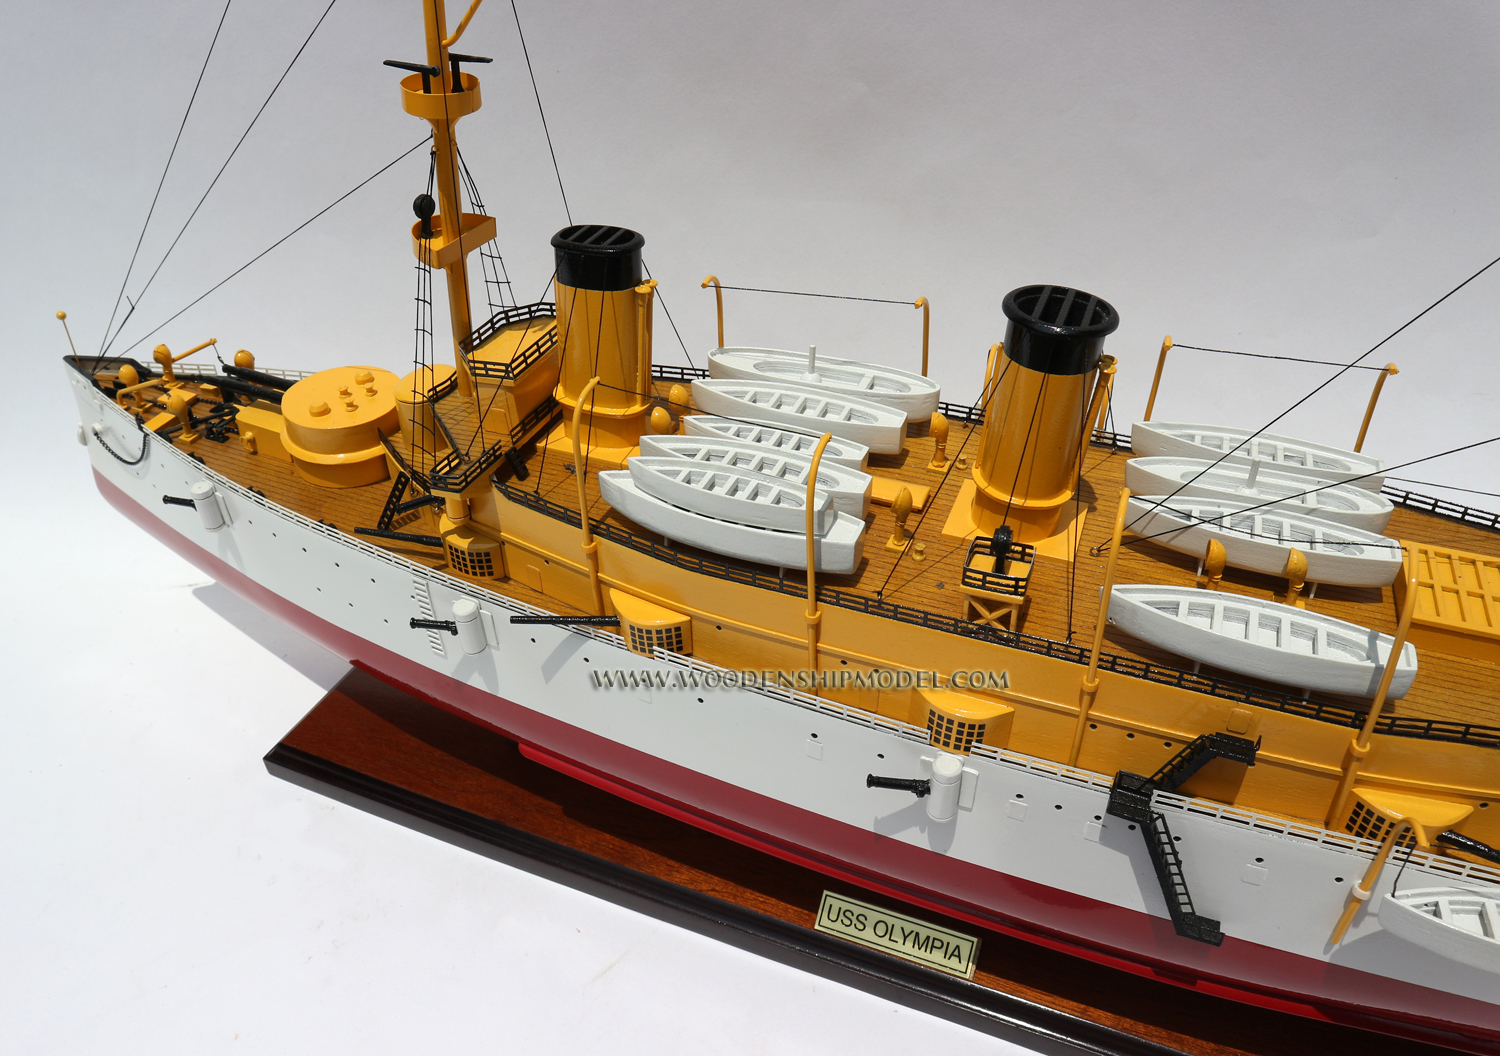 USS Olympia wooden model ship ready for display